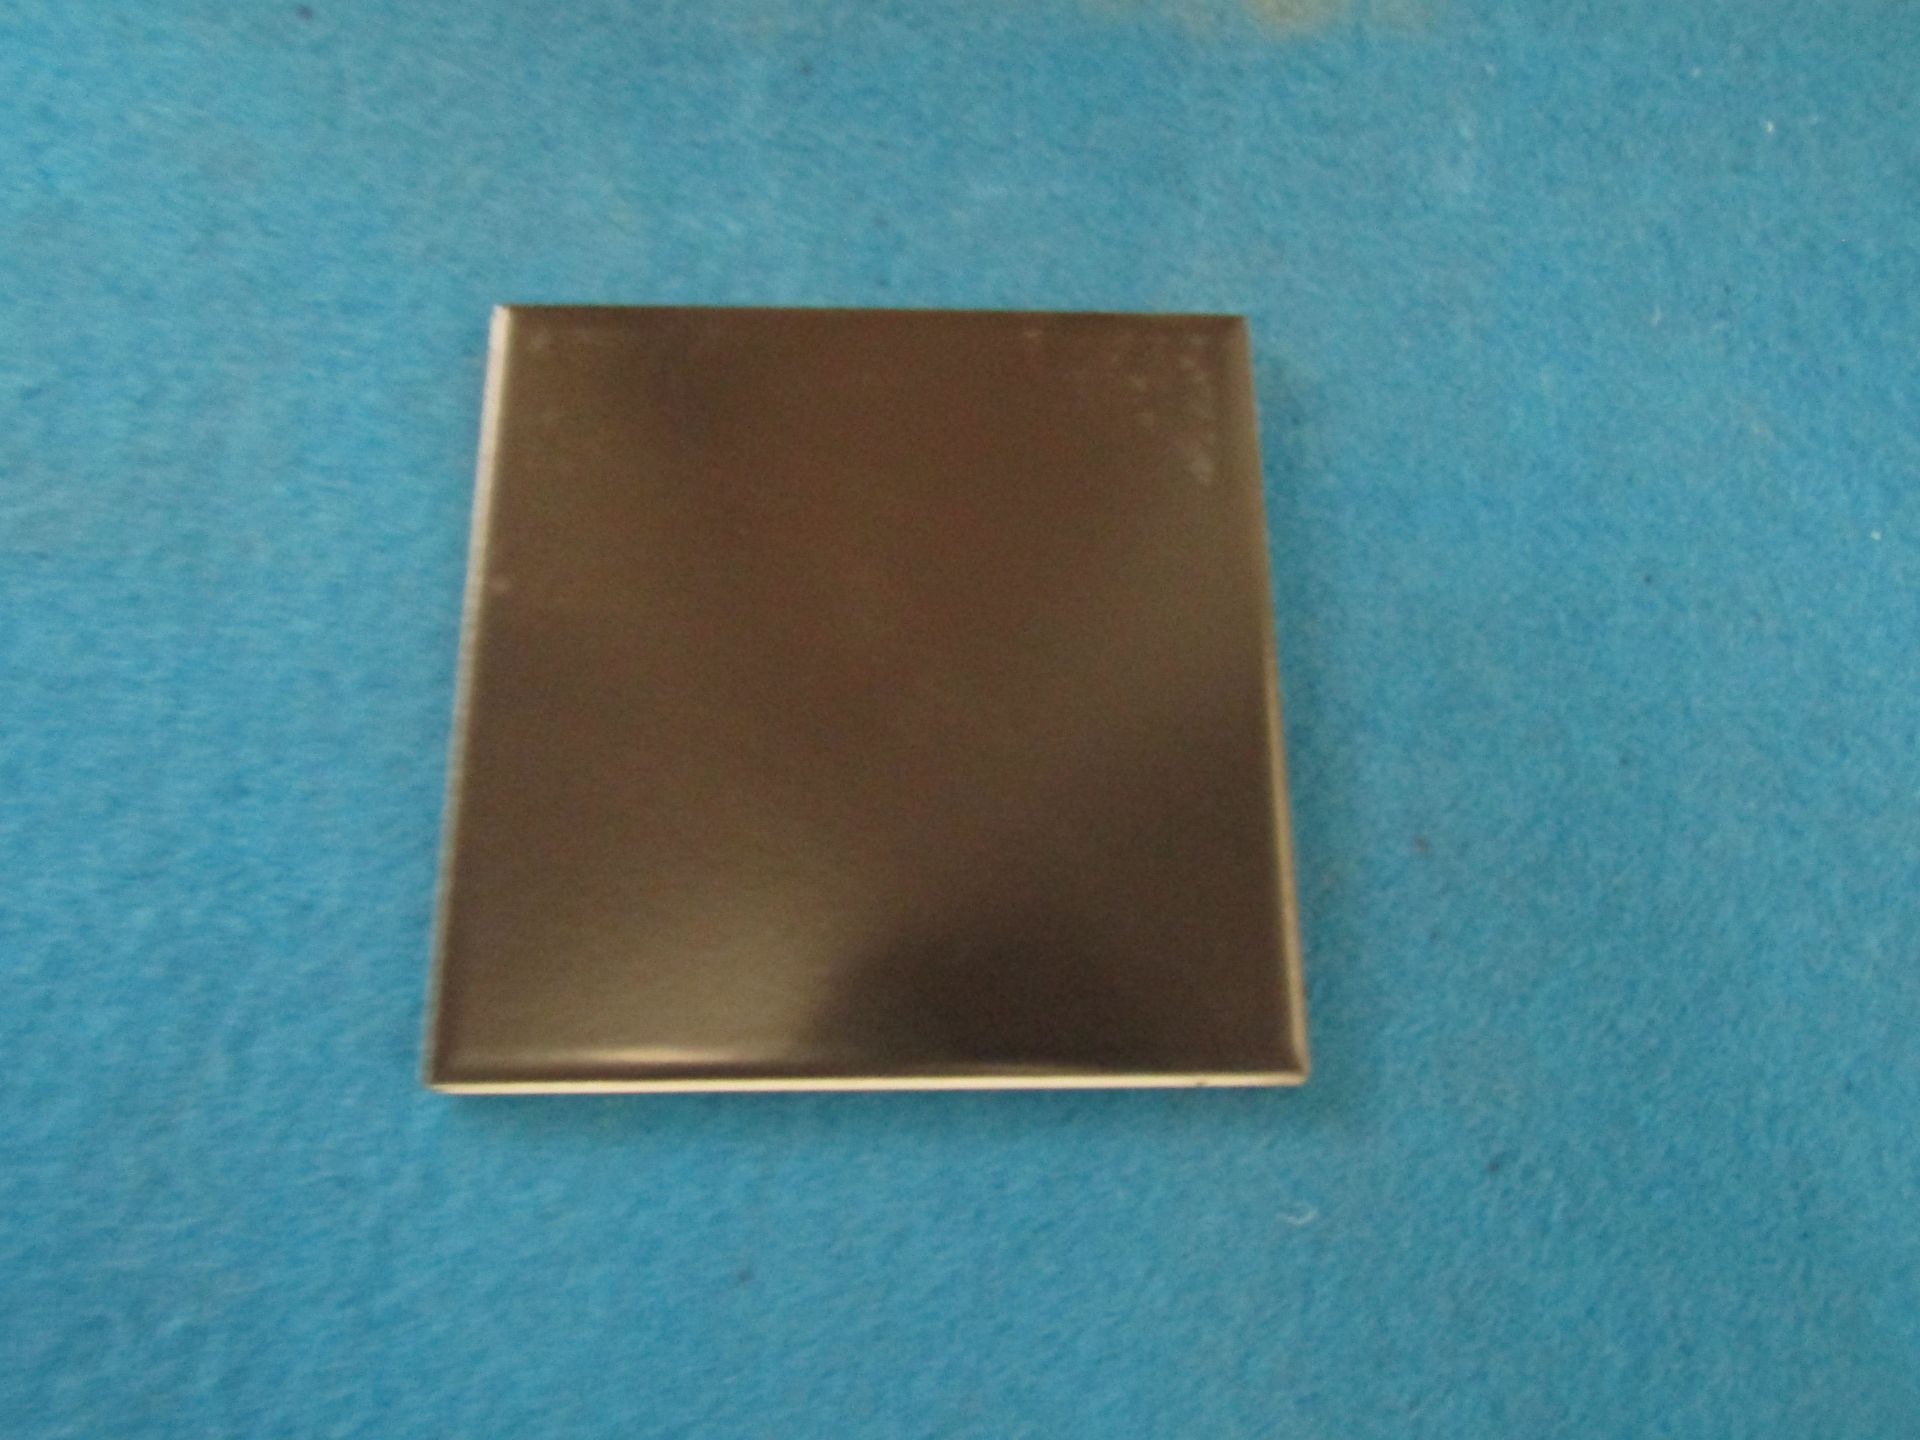 22x Packs of 25 wall tile rich brown satin 10 x 10cm, new. Each pack RRP £11.99 giving a lot total